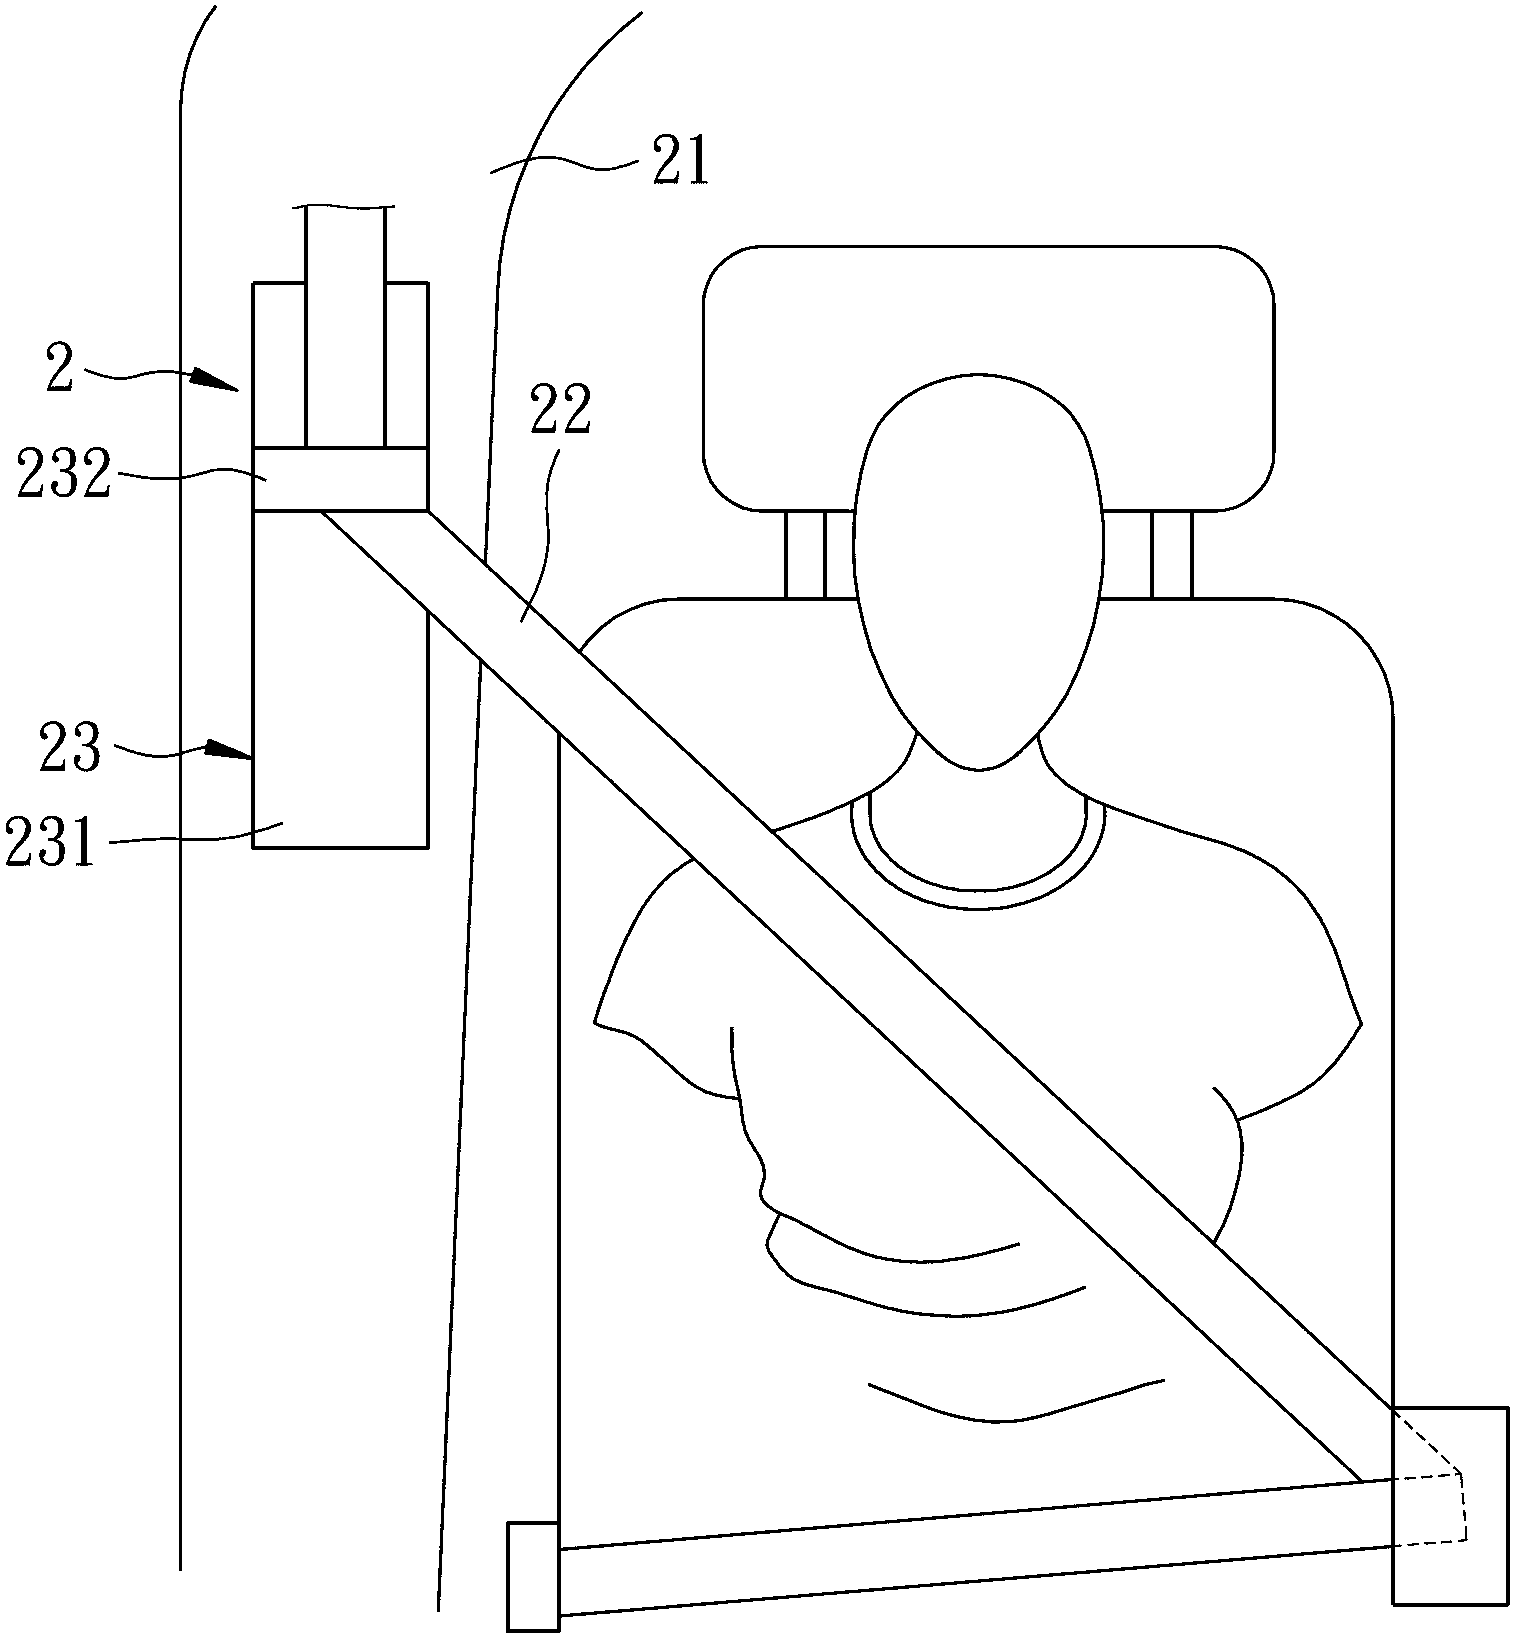 Safety belt device with adjustable height